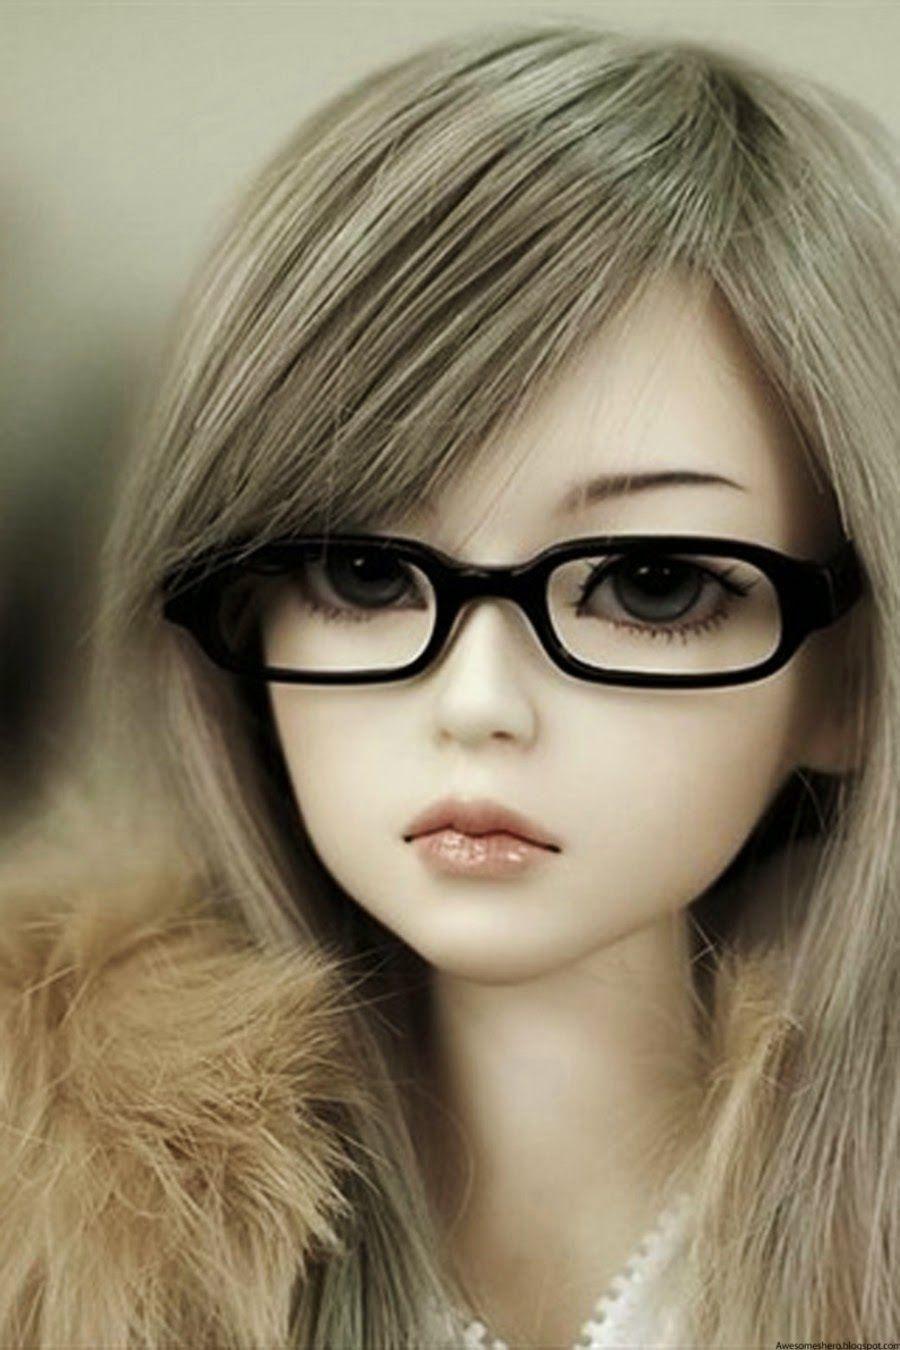 Very Cute Dolls Wallpapers For Facebook - Wallpaper Cave